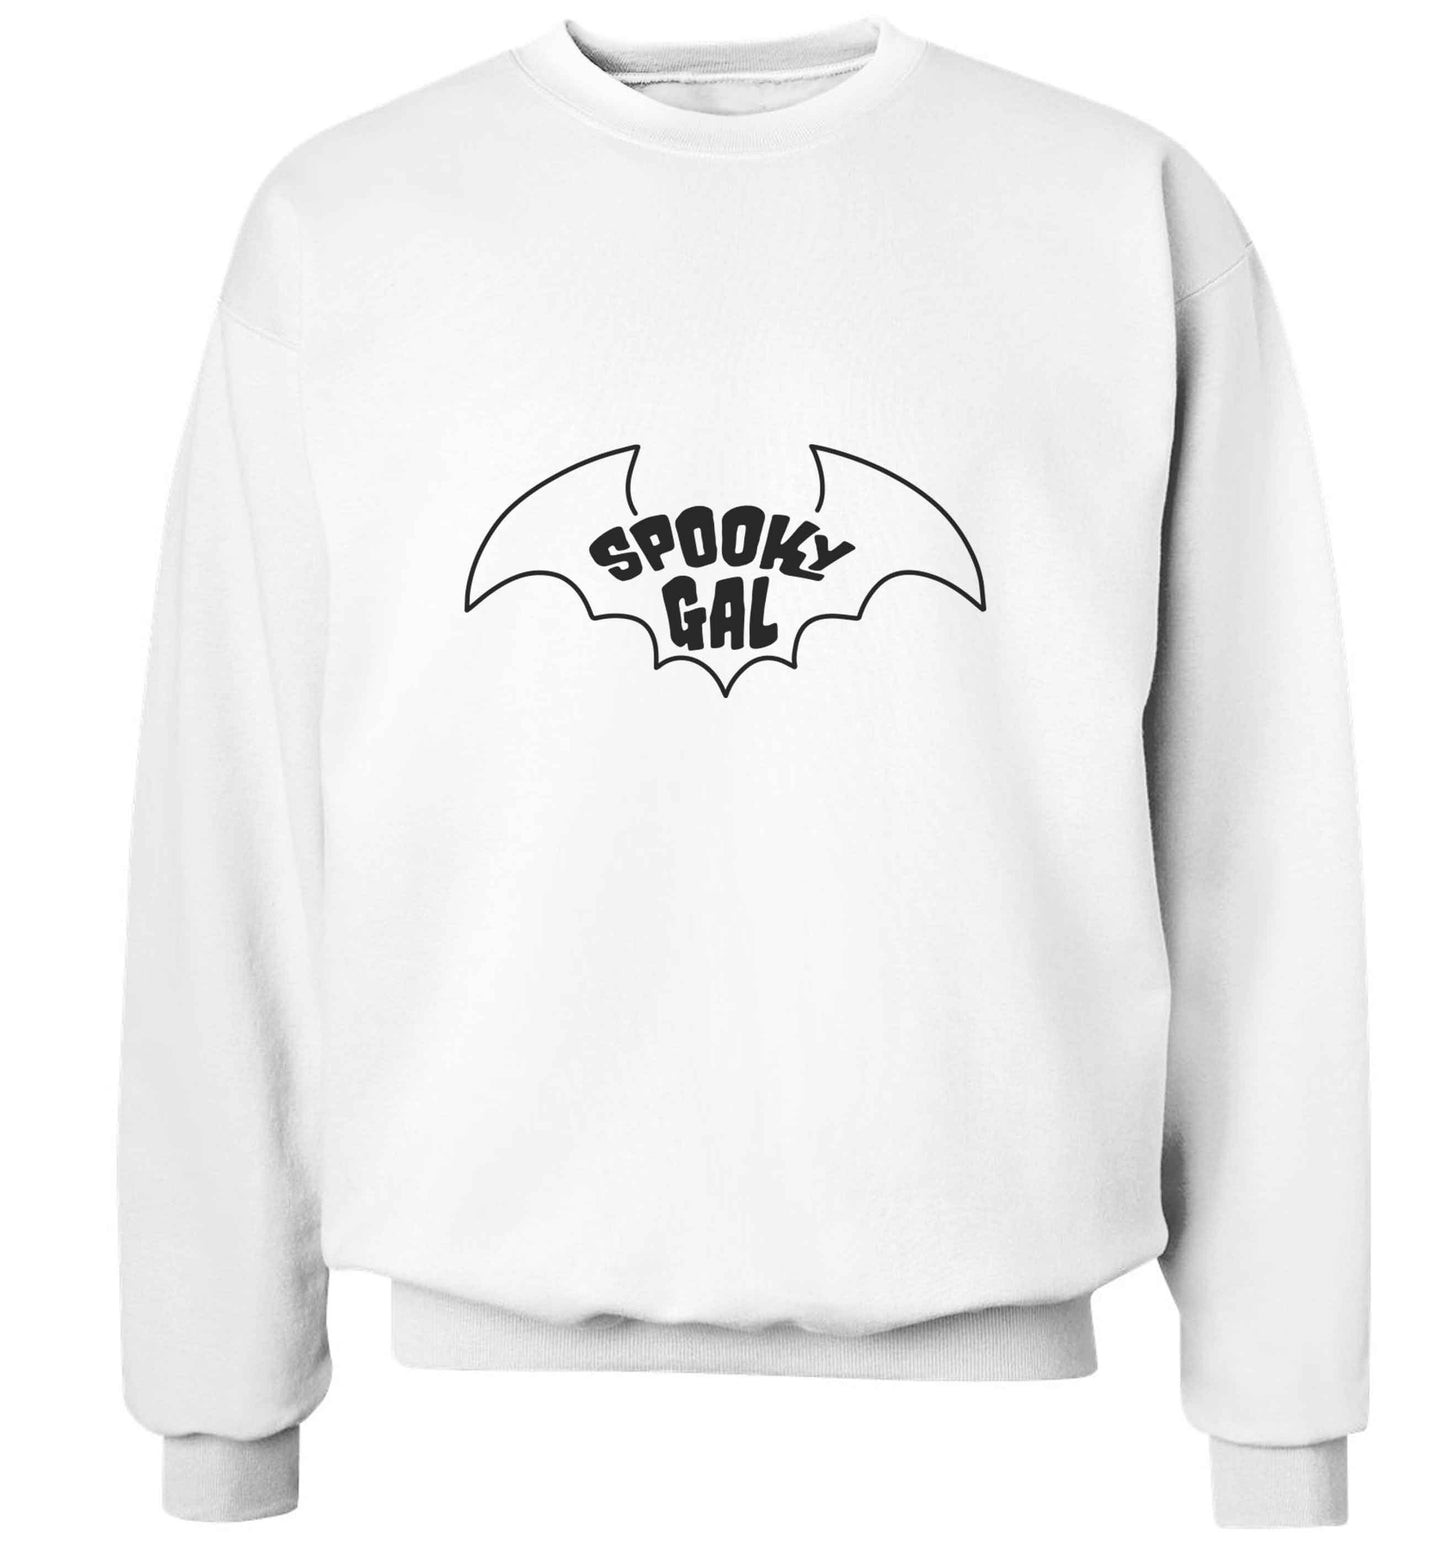 Spooky gal Kit adult's unisex white sweater 2XL